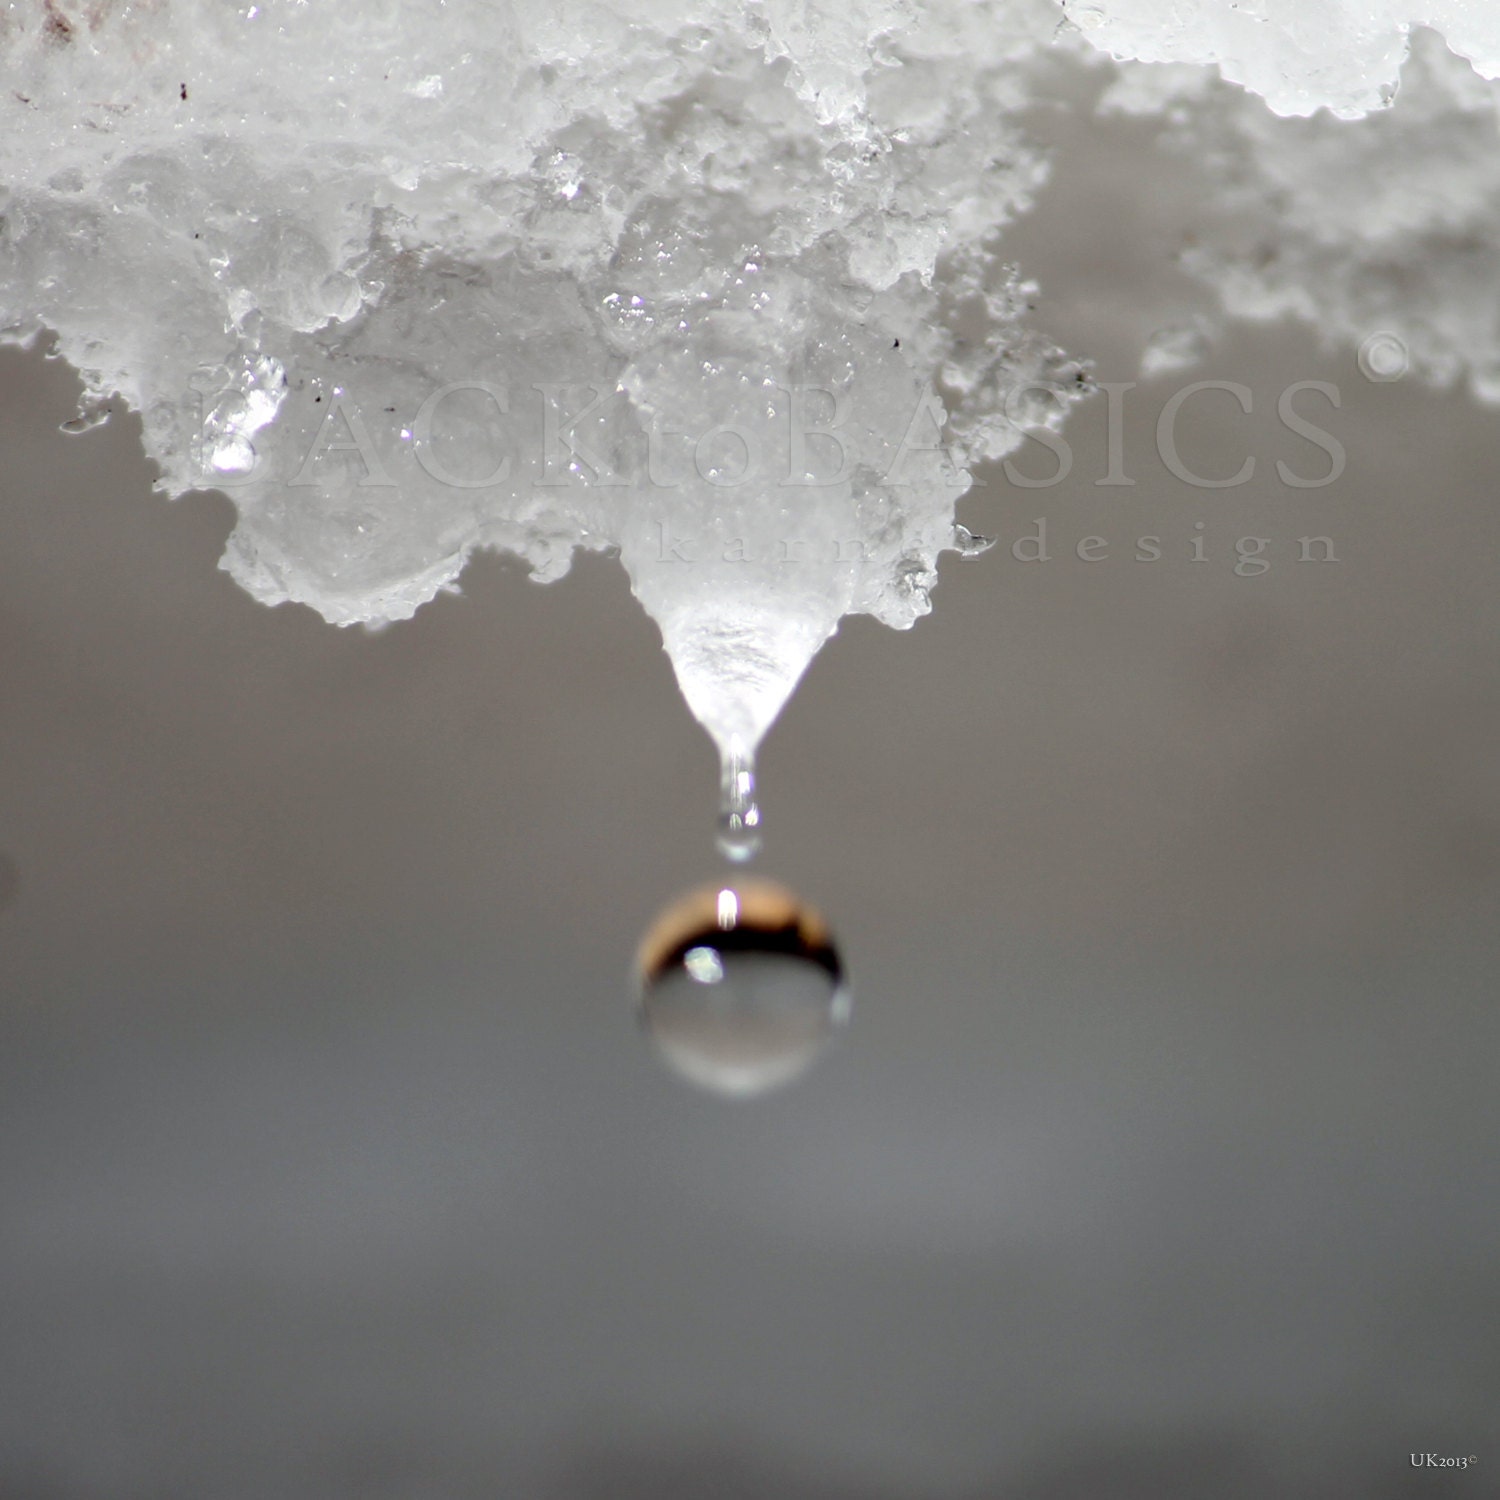 Ice and Water Drop, Fine Art Photography, Snow Storm Melting ice, Grey, White, Black, Blizzard winter, country living, interior design - ULLIkarnerART